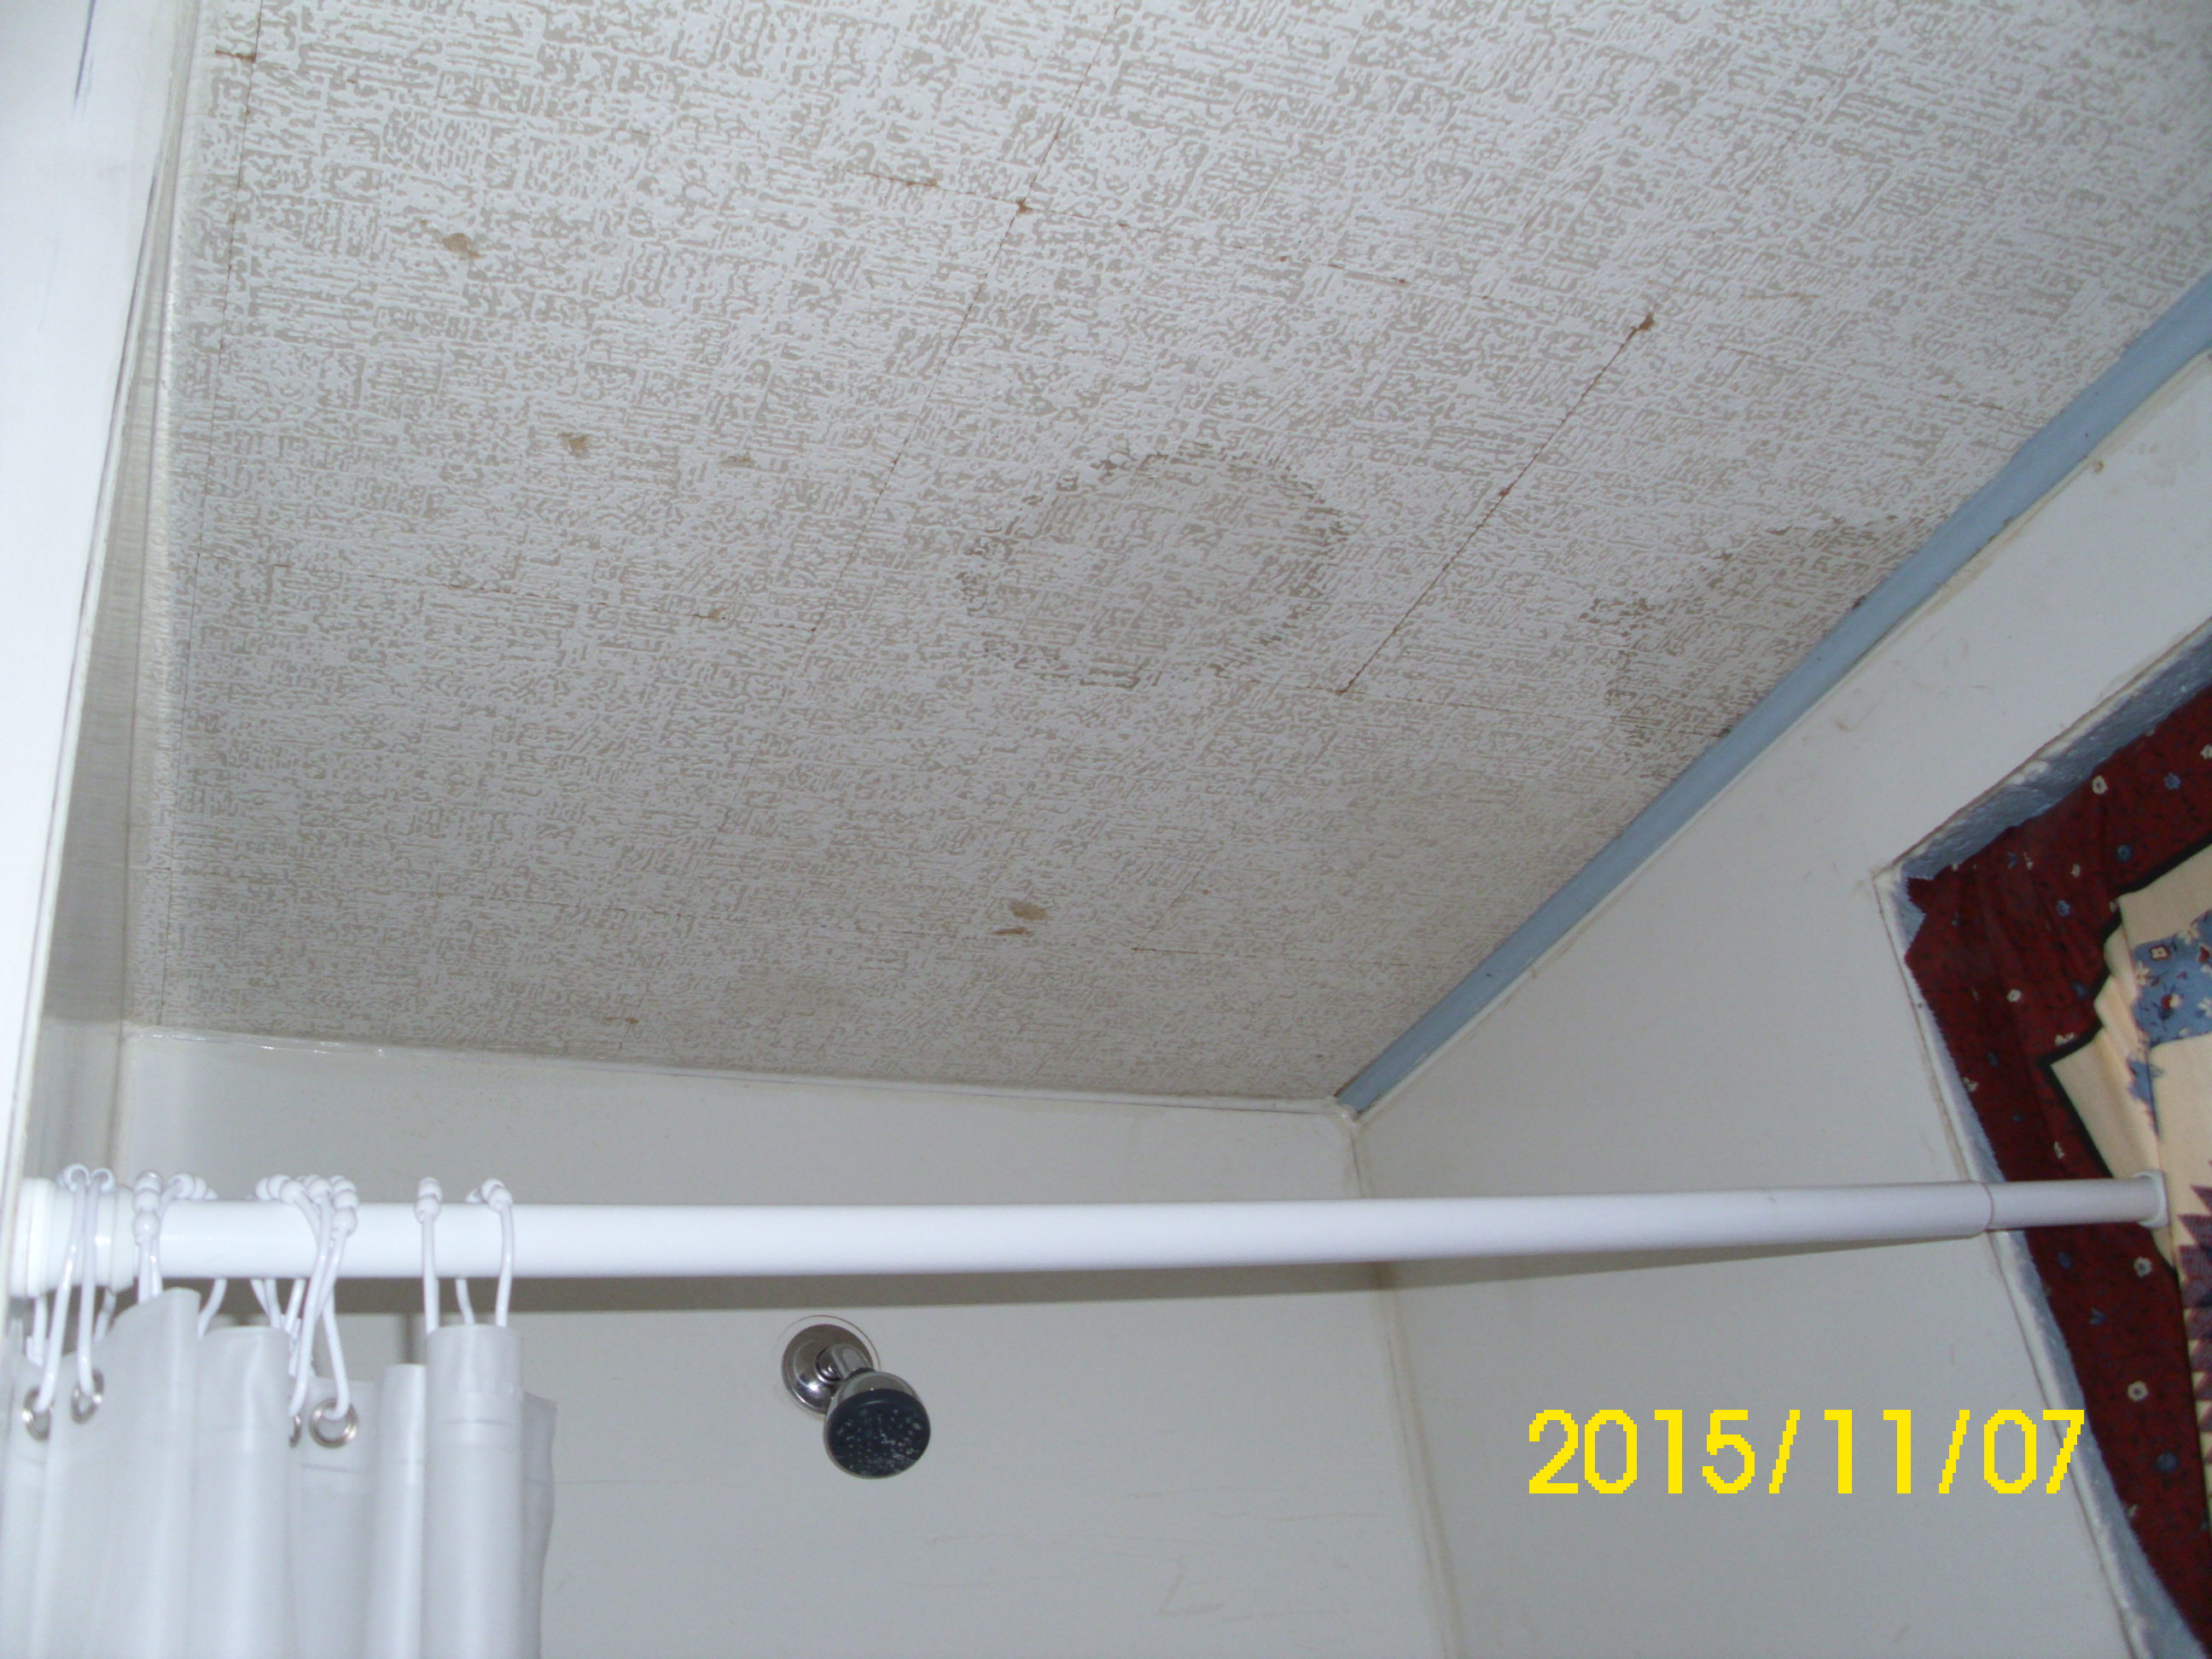 MOLD STAINS IN SHOWER 10 DAYS BEFORE INSPECTION 